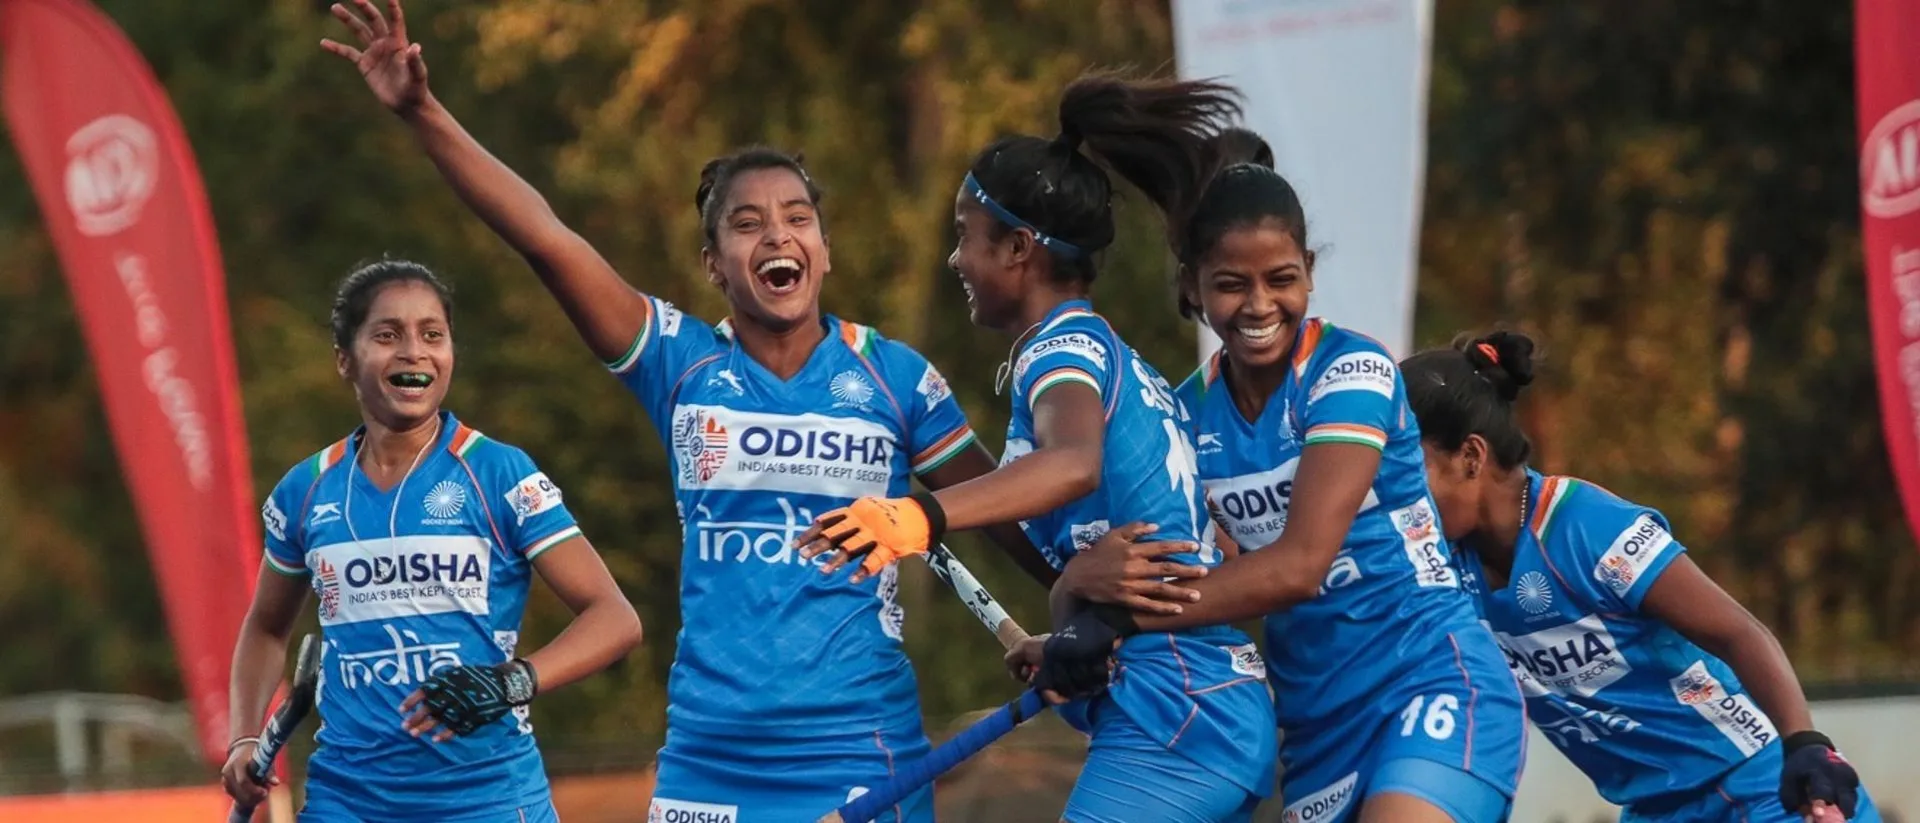 Indian junior women’s hockey team finishes the tournament on a high after beating England 6-2